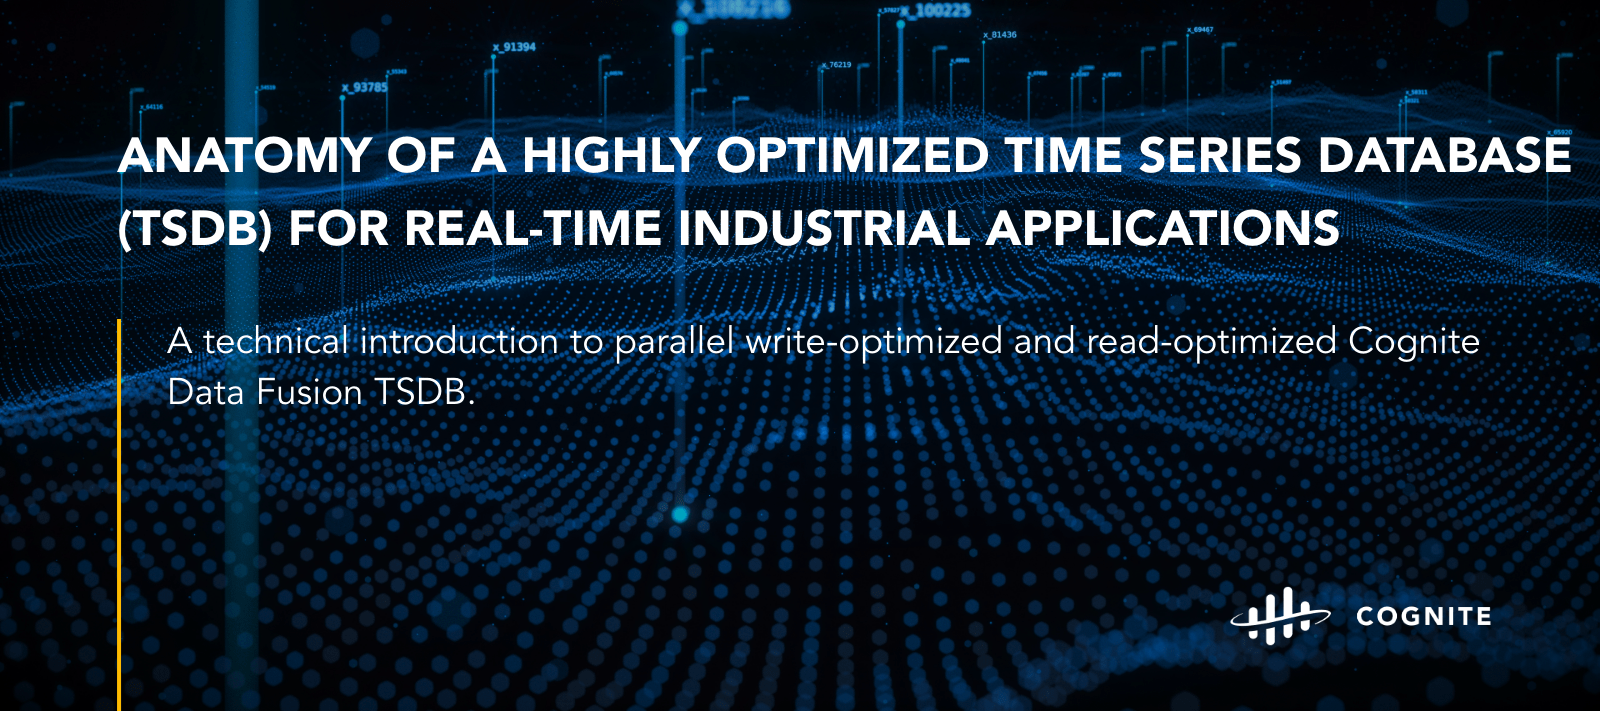 Anatomy of a highly optimized time series database (TSDB) for real-time industrial applications